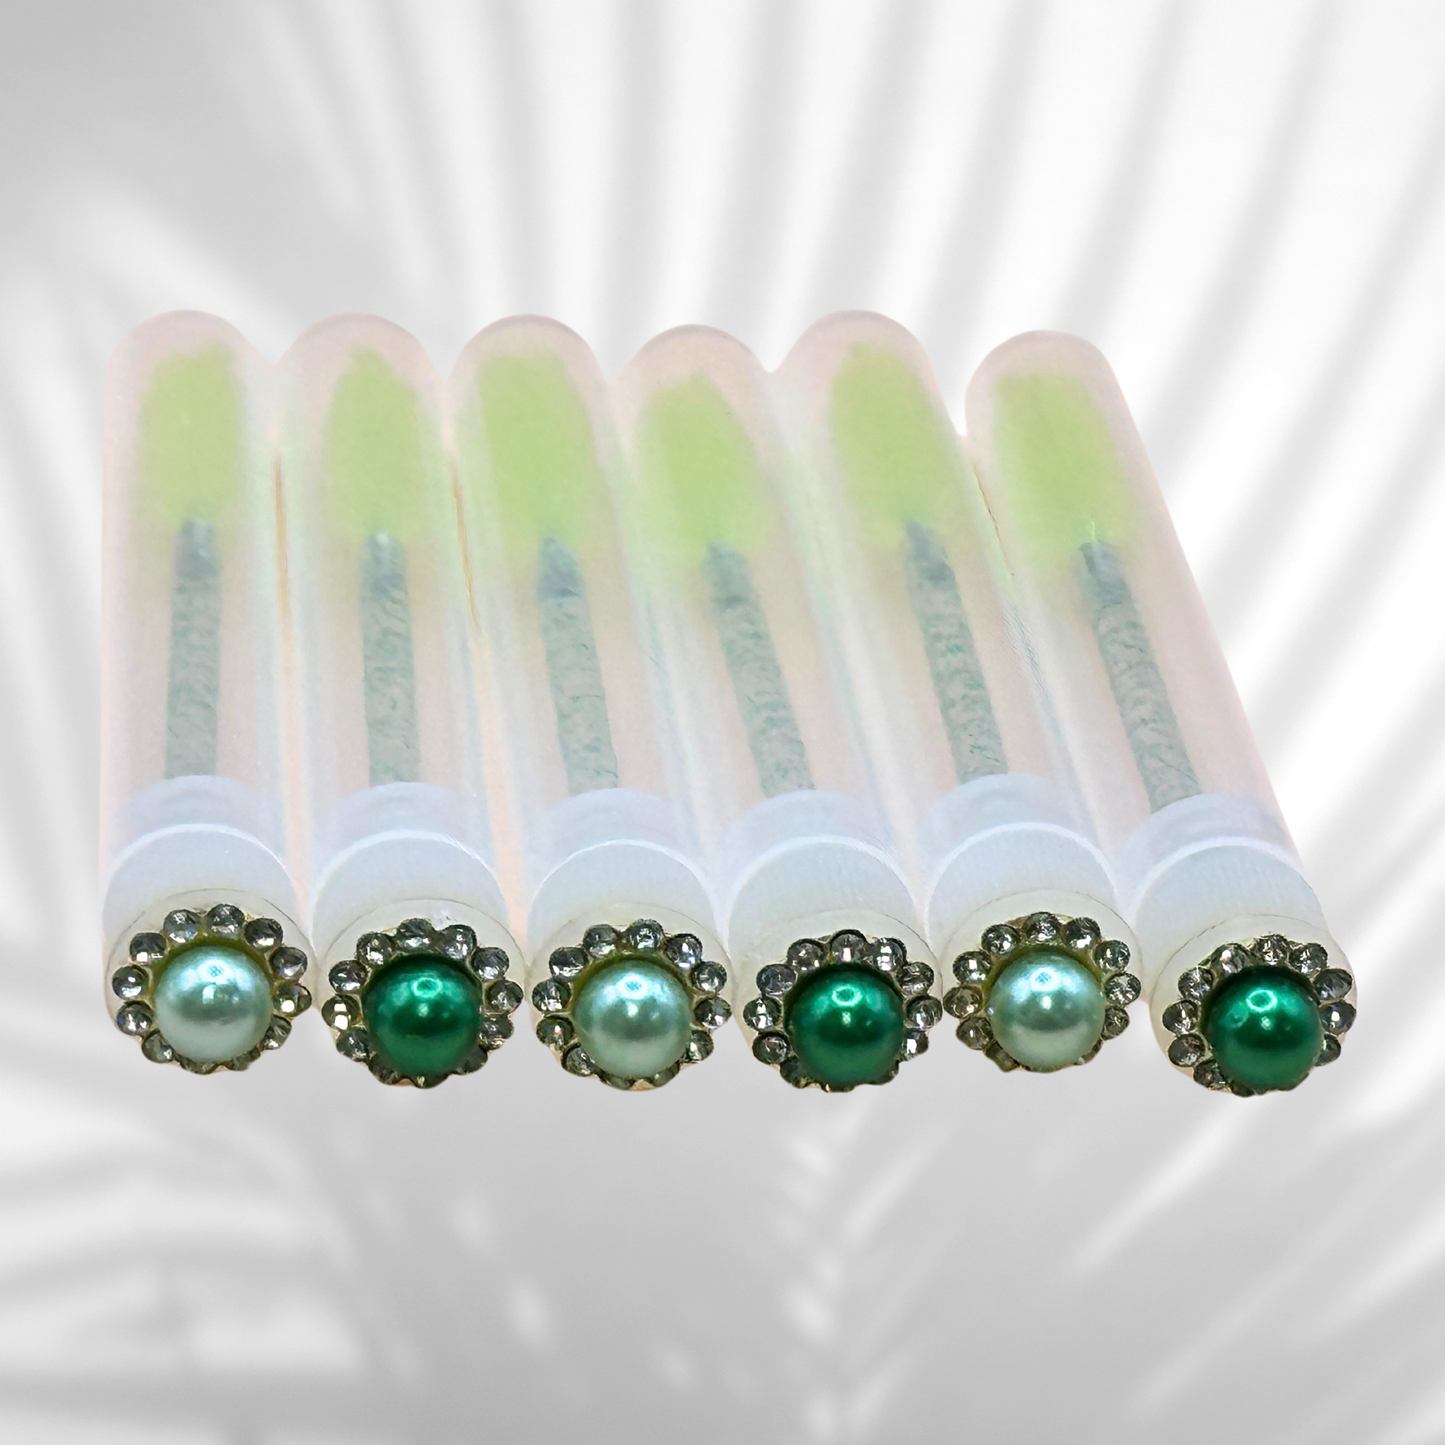 Glitter Eyelash Wands with Cover  - St. Patty's Day - Green pearls